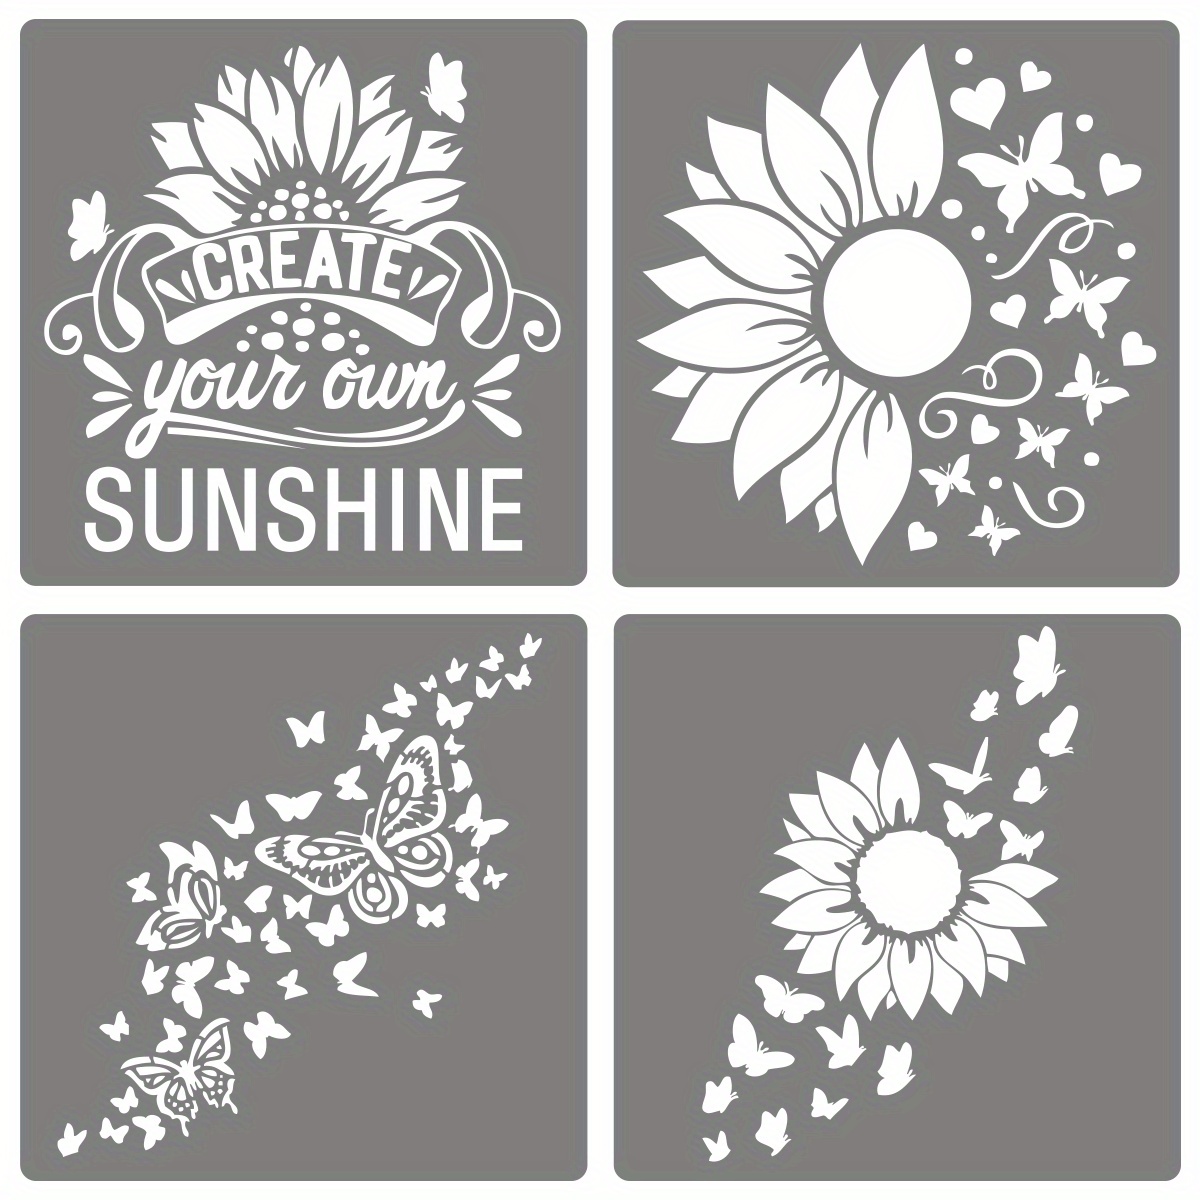 Hellobye20PCS Reusable Flower Stencils For Painting On Wood, Butterfly &  Sunflower 